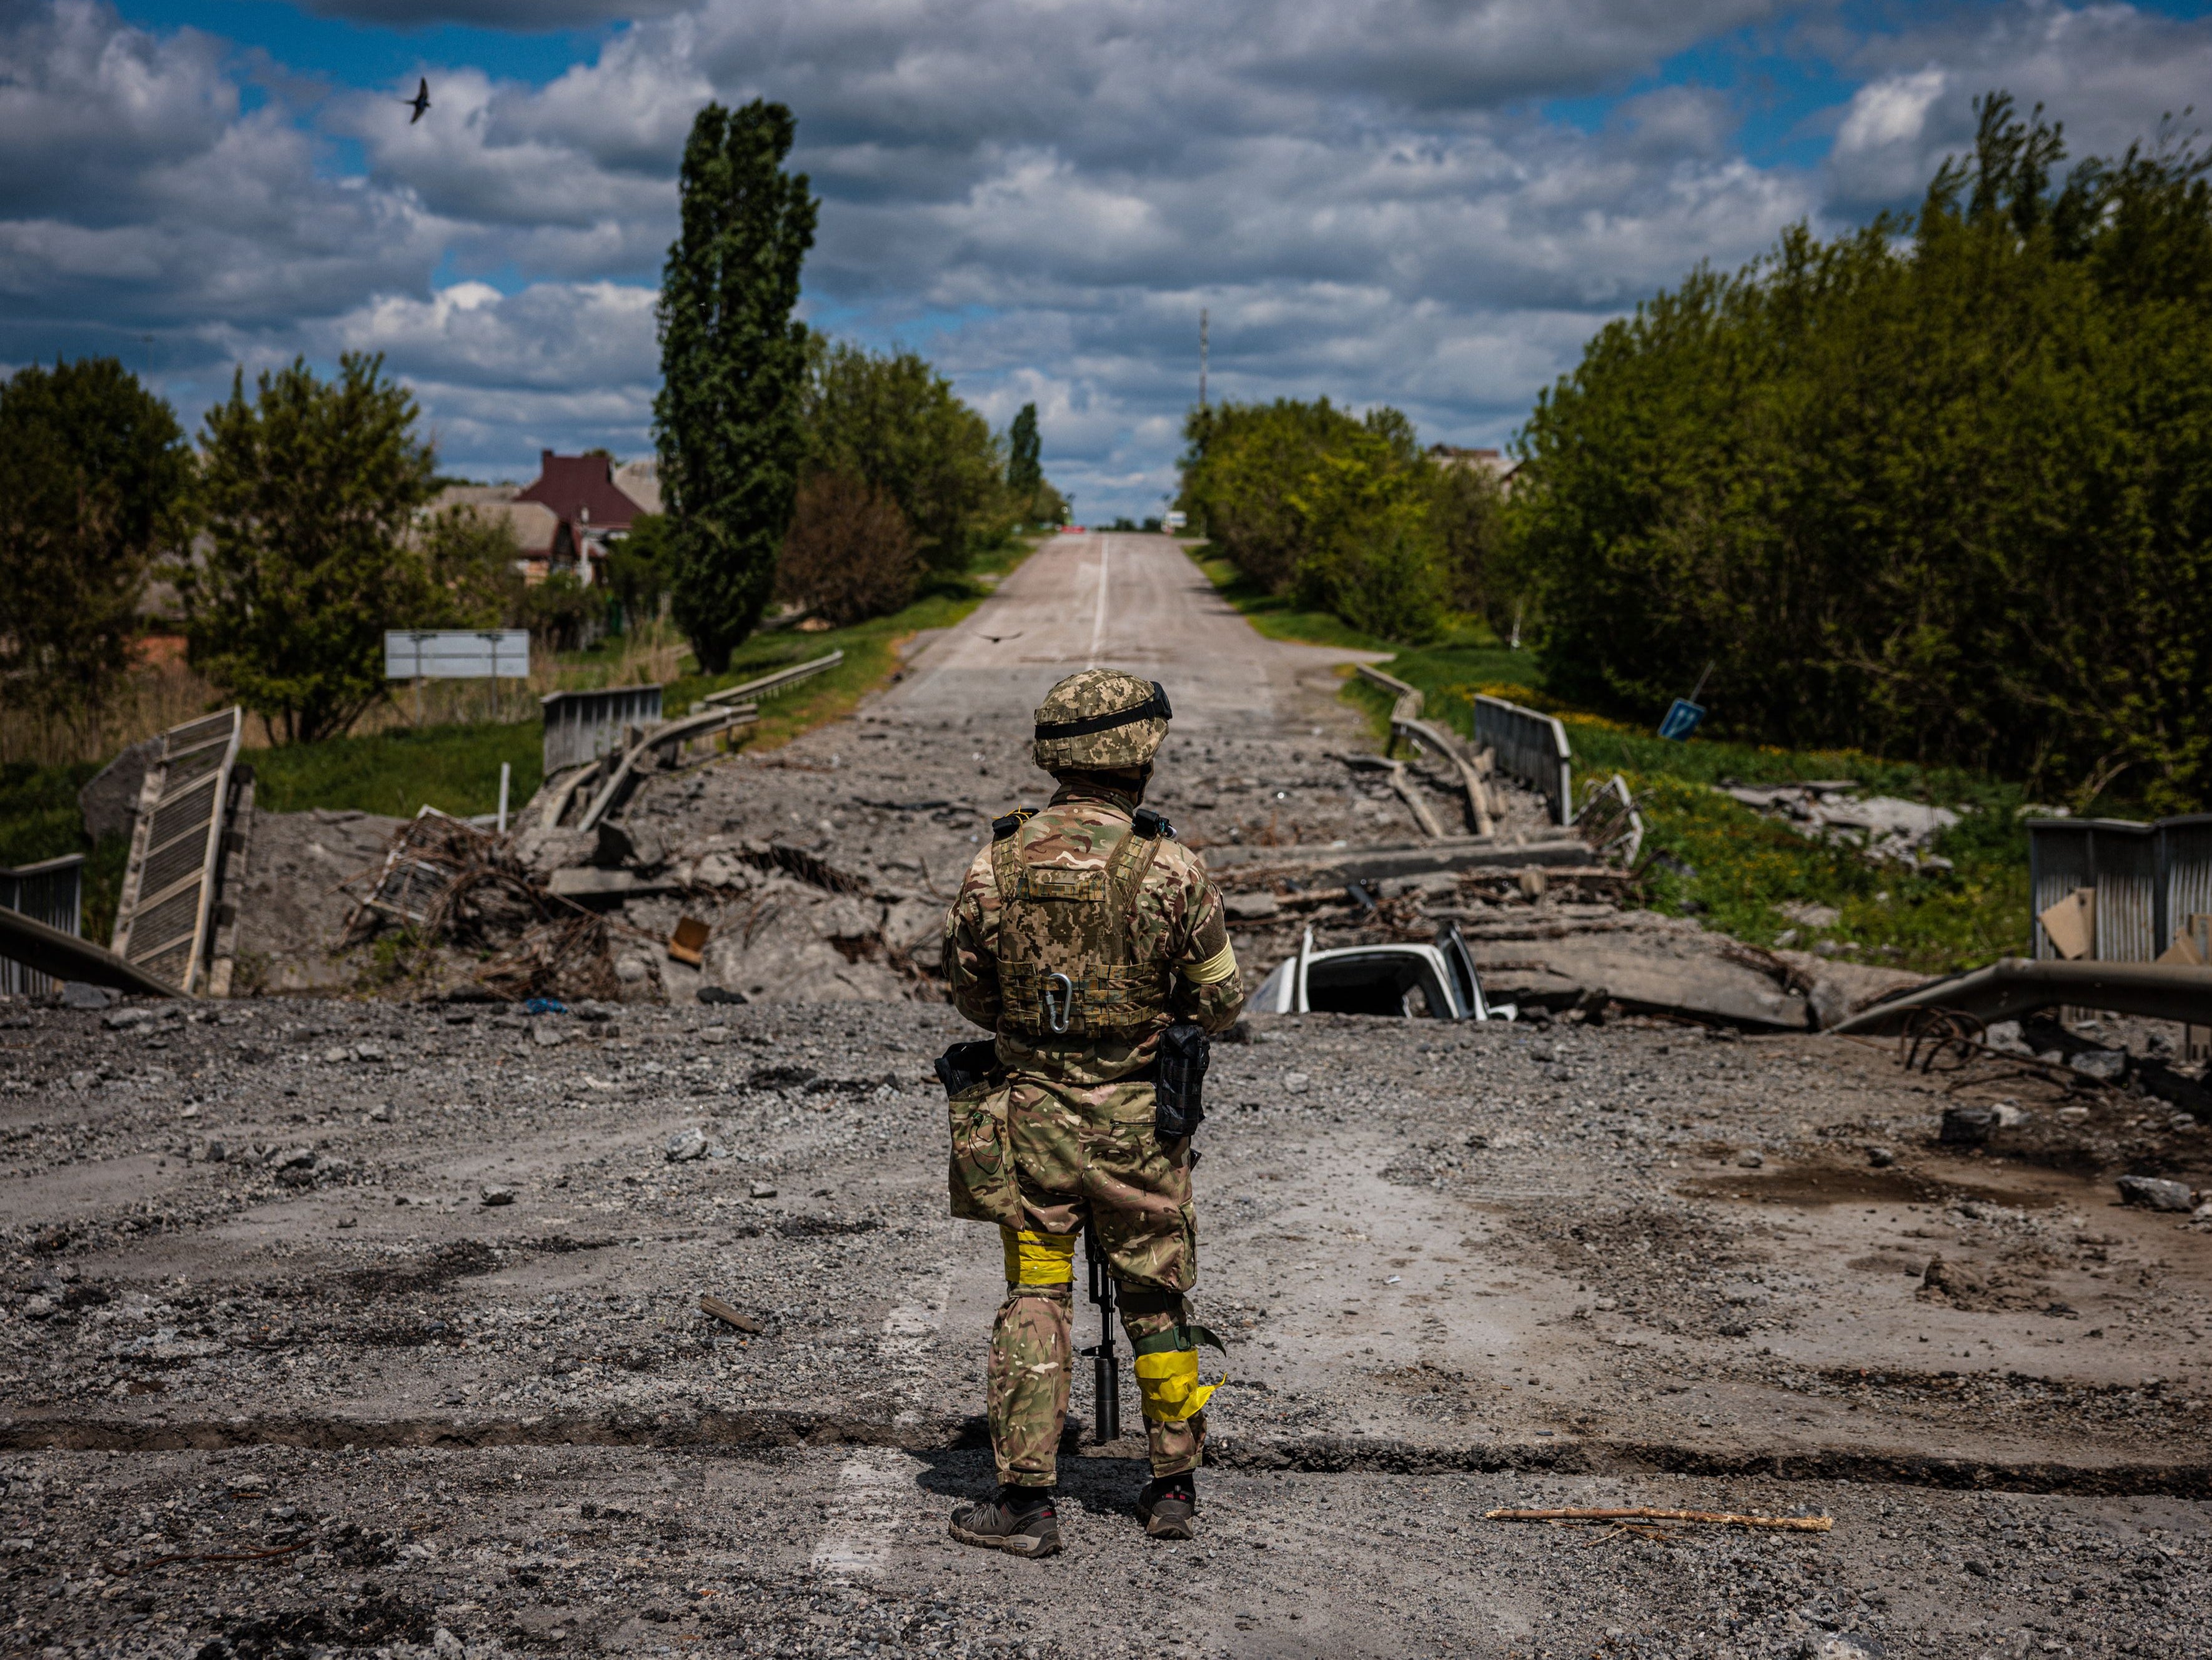 A soldier of the Kraken Ukrainian special forces unit observes a destroyed bridge on the road near the village of Rus'ka Lozova, north of Kharkiv, on 16 May